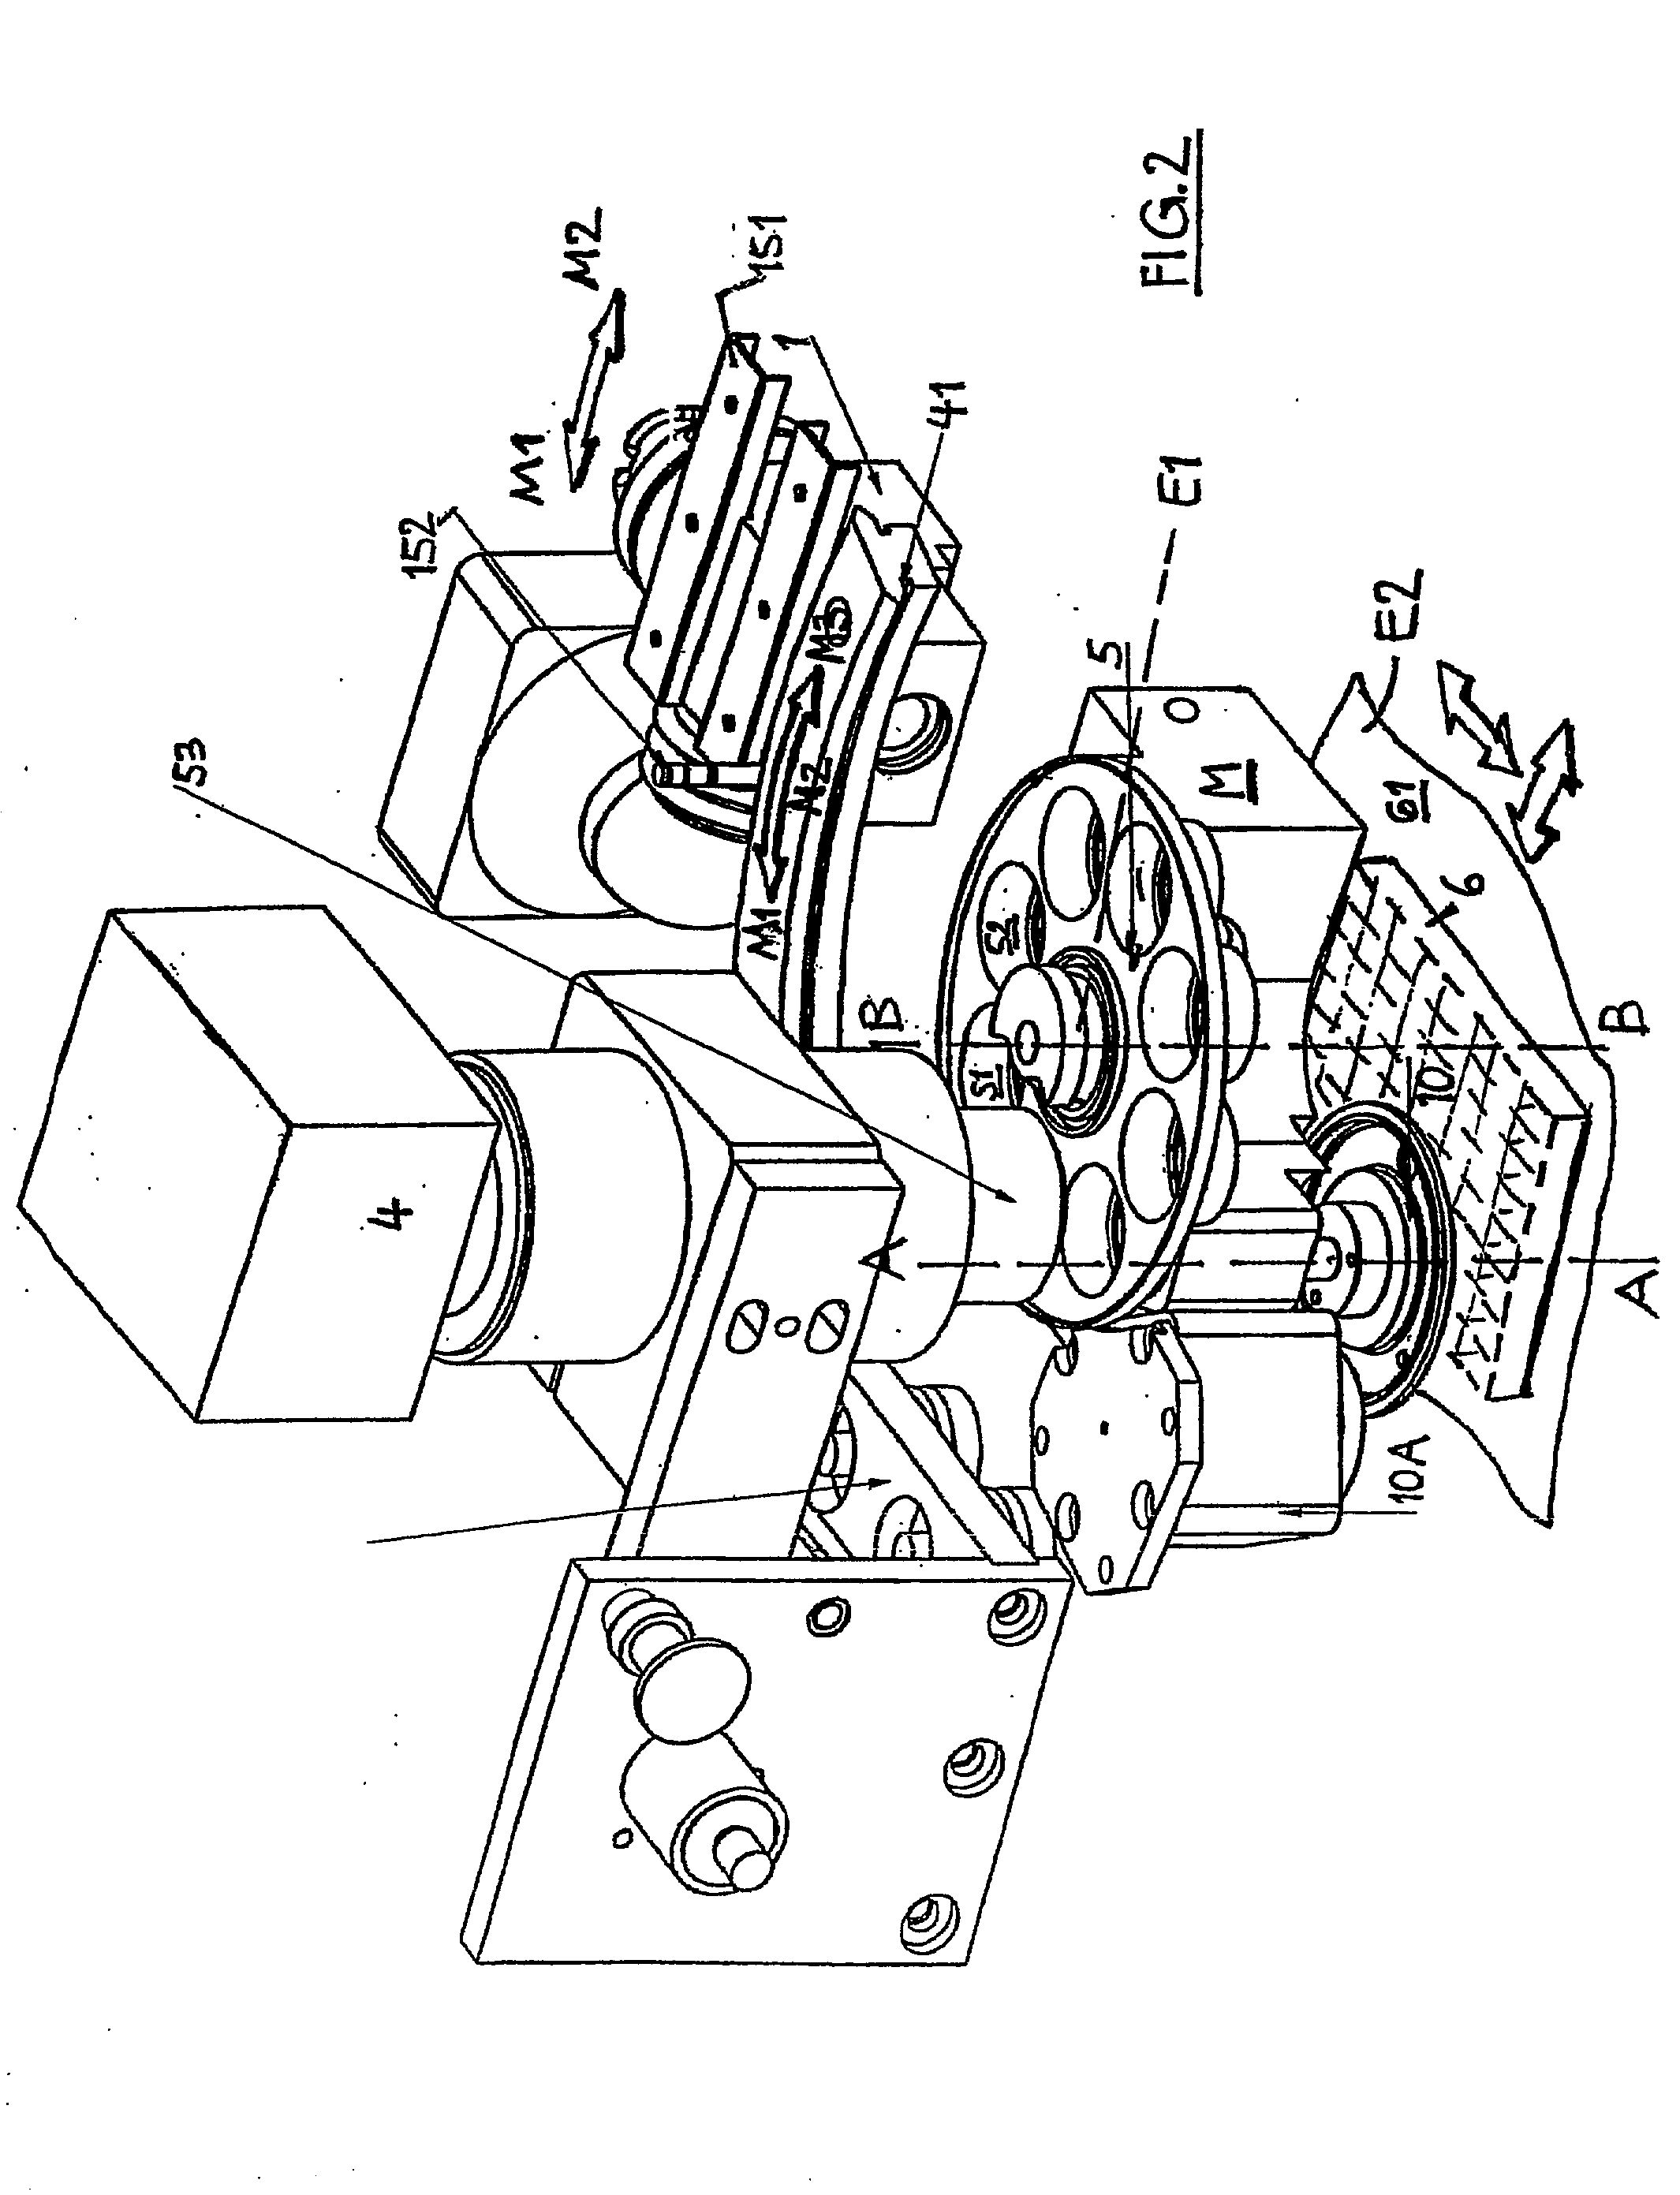 Apparatus for measuring in particular luminescent and/or fluorescent radiation